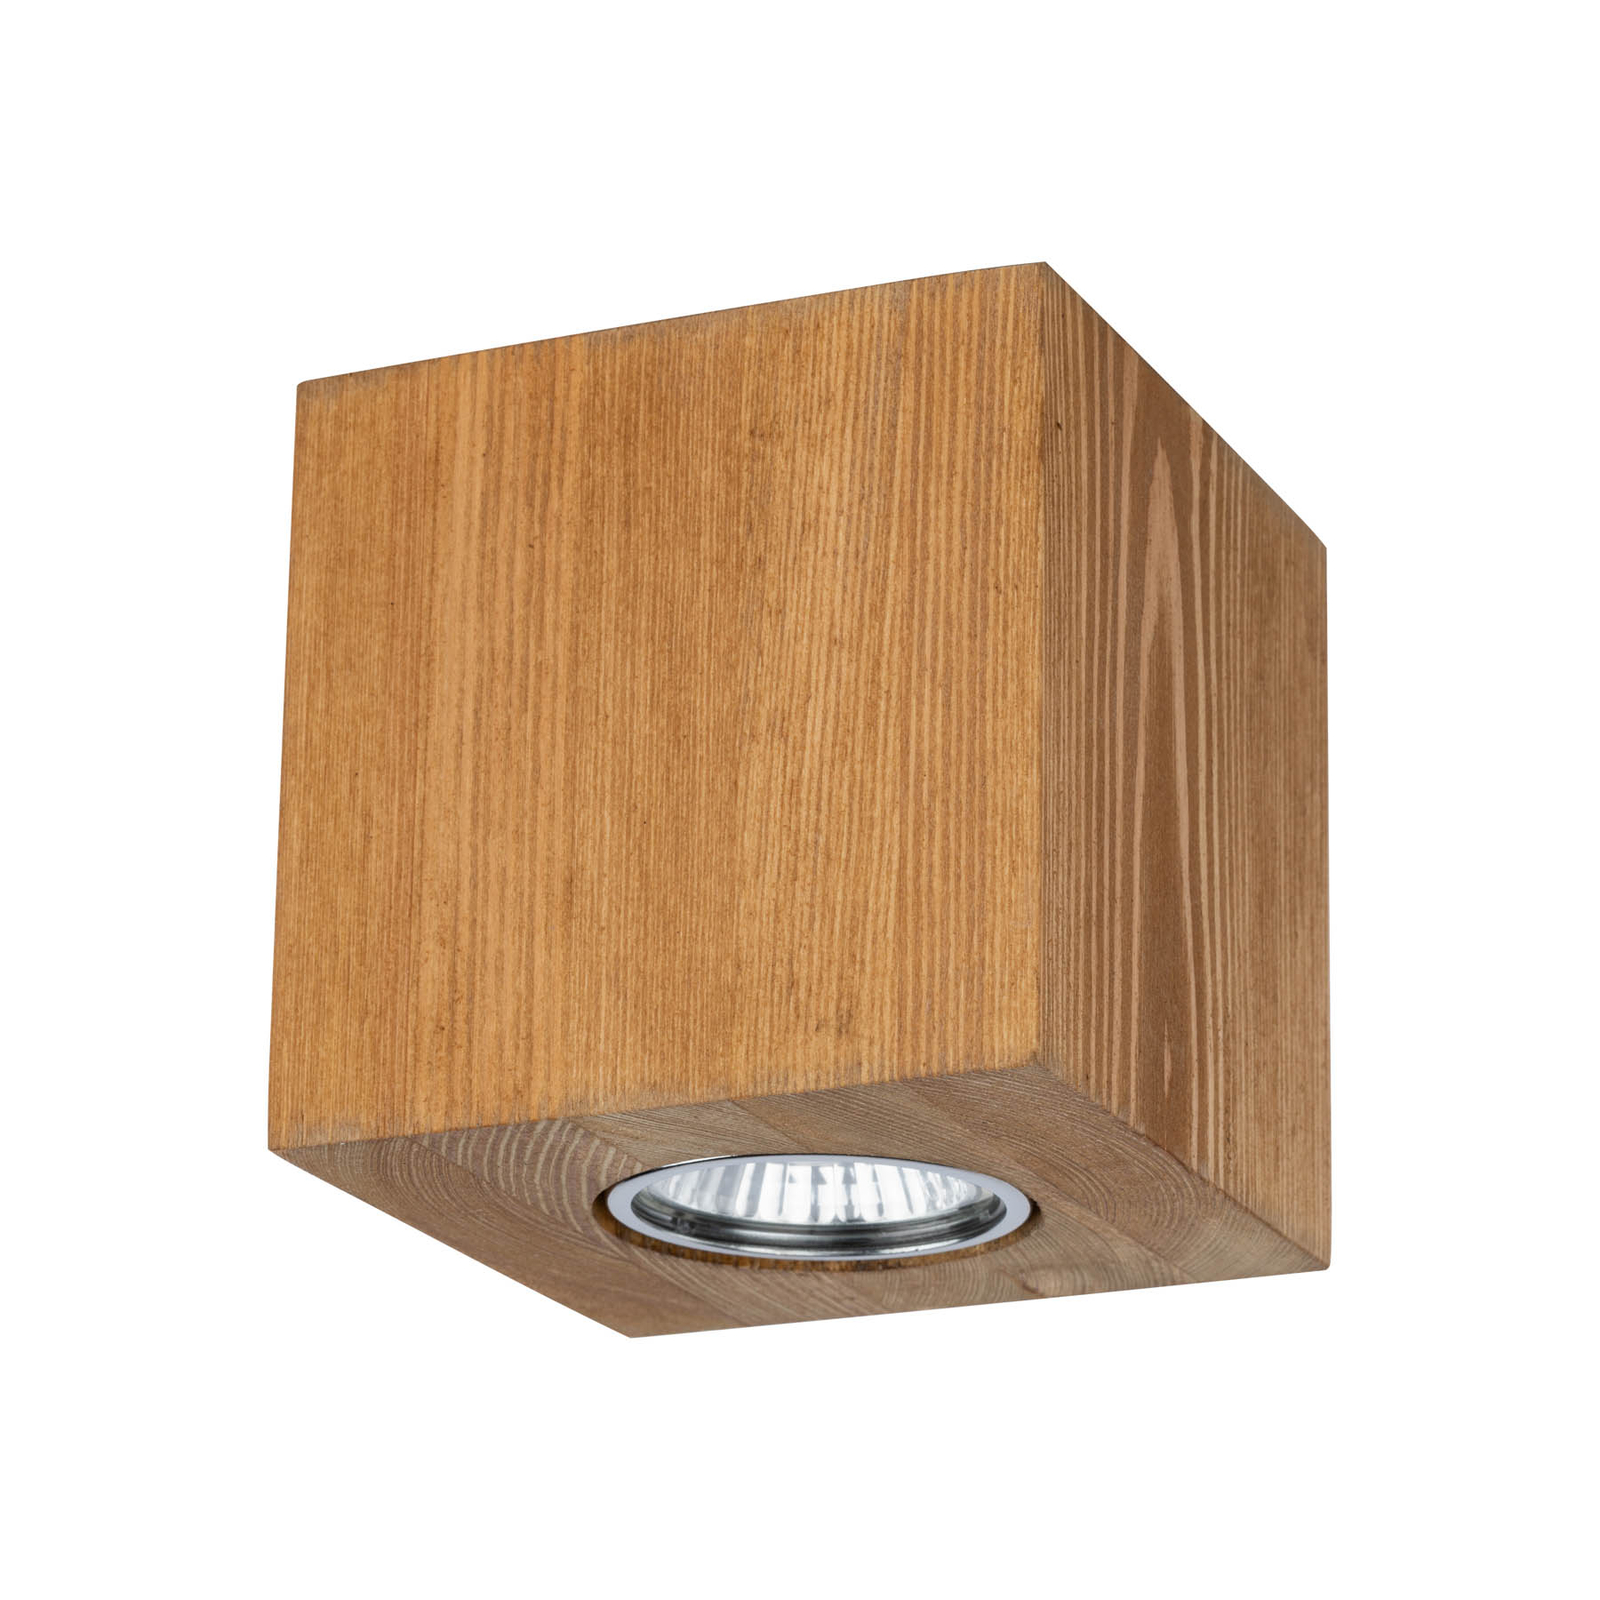 Envostar Tuni downlight, pine stained brown